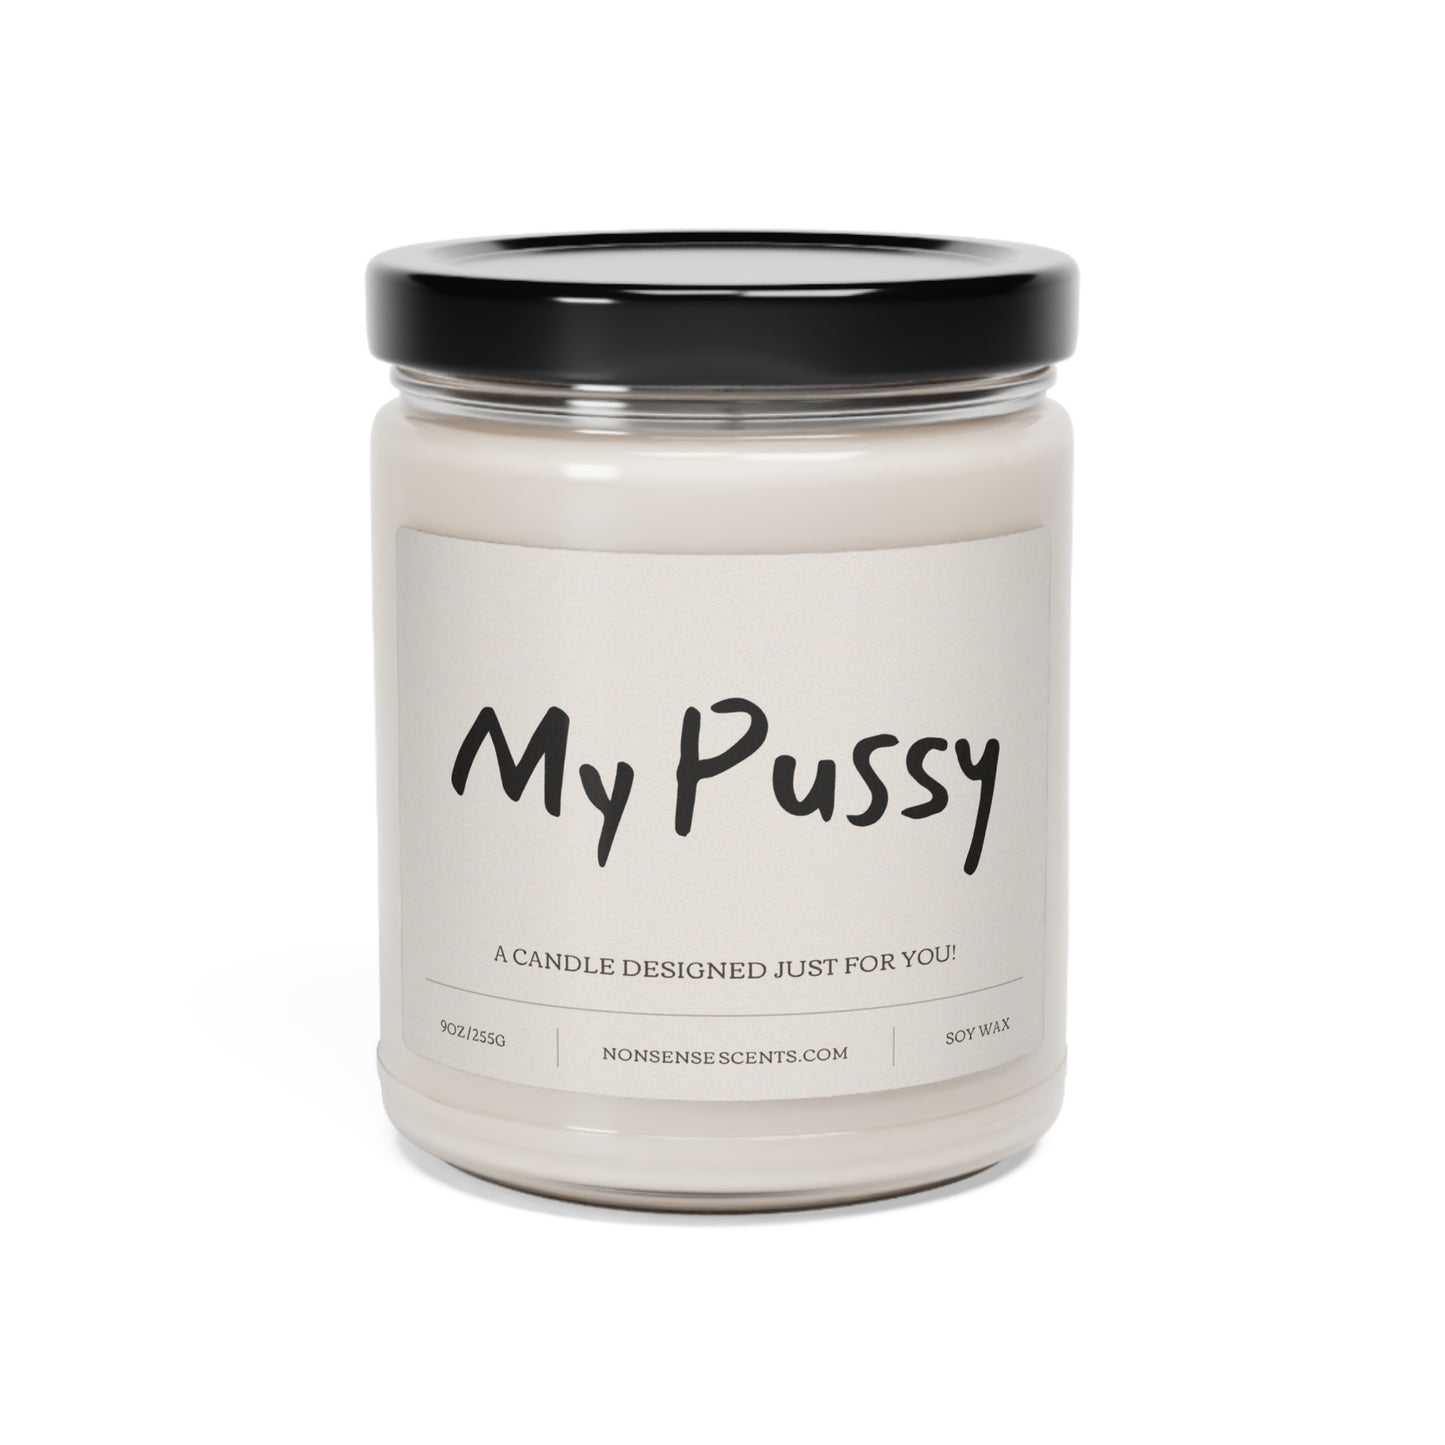 "My Pussy" Scented Candle